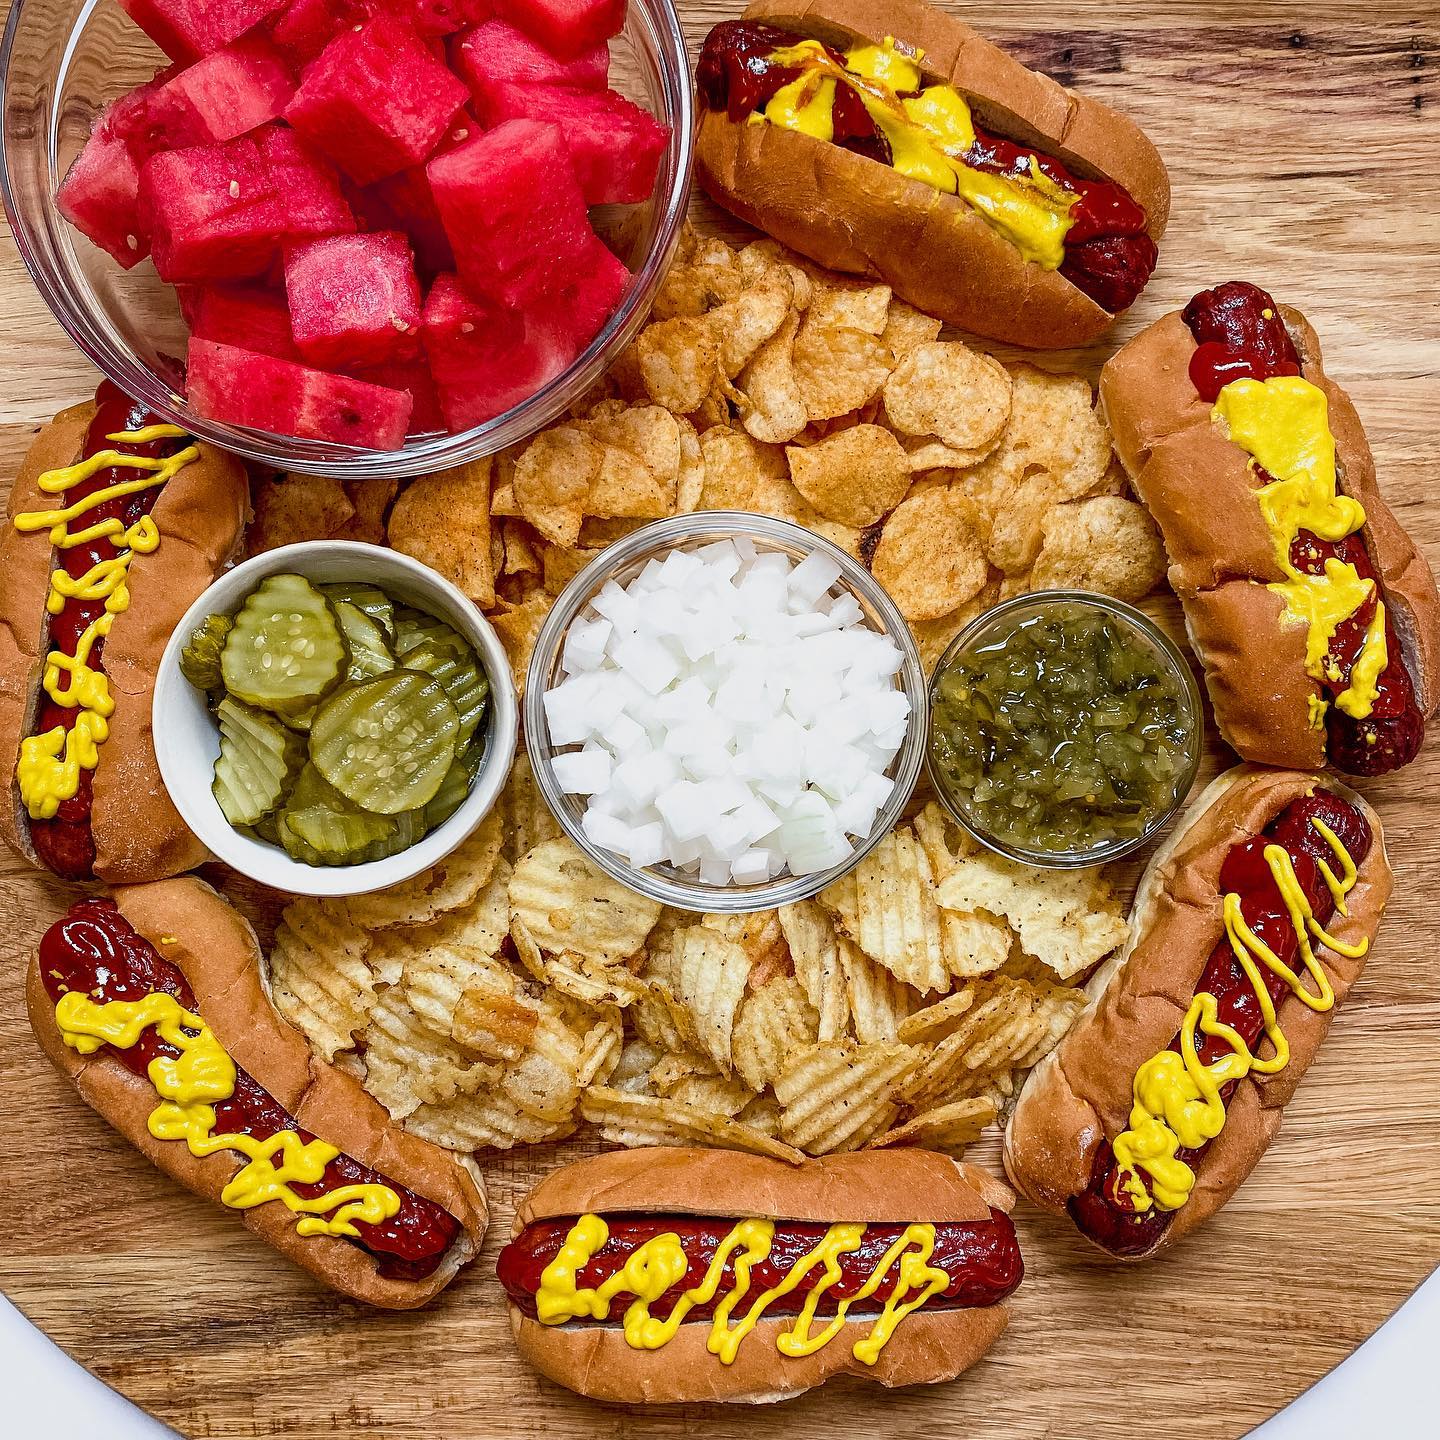 BUILD YOUR OWN HOTDOG BOARD🌭memorial day weekend is approaching & what better way to party then with a hotdog board💁🏼‍♀️
.
we made this for a dinner & the boys absolutely loved it! T helped add the ketchup & mustard & Noah ate the watermelon & chips while it was being built 🤣 perfect idea for kids and backyard parties👌🏻
.
what you need to make it:
-hotdogs (we use tetons polish sausage)
-hotdog buns
-ketchup
-mustard
-relish 
-sauerkraut (we didn’t add this time)
-pickles
-white onions
-watermelon
-chips (kettled cook are out favs!!)
.
what would you add to this board?!😍
.
#memorialdayweekend #hotdogs🌭 #familydinners #kidfriendlymeals